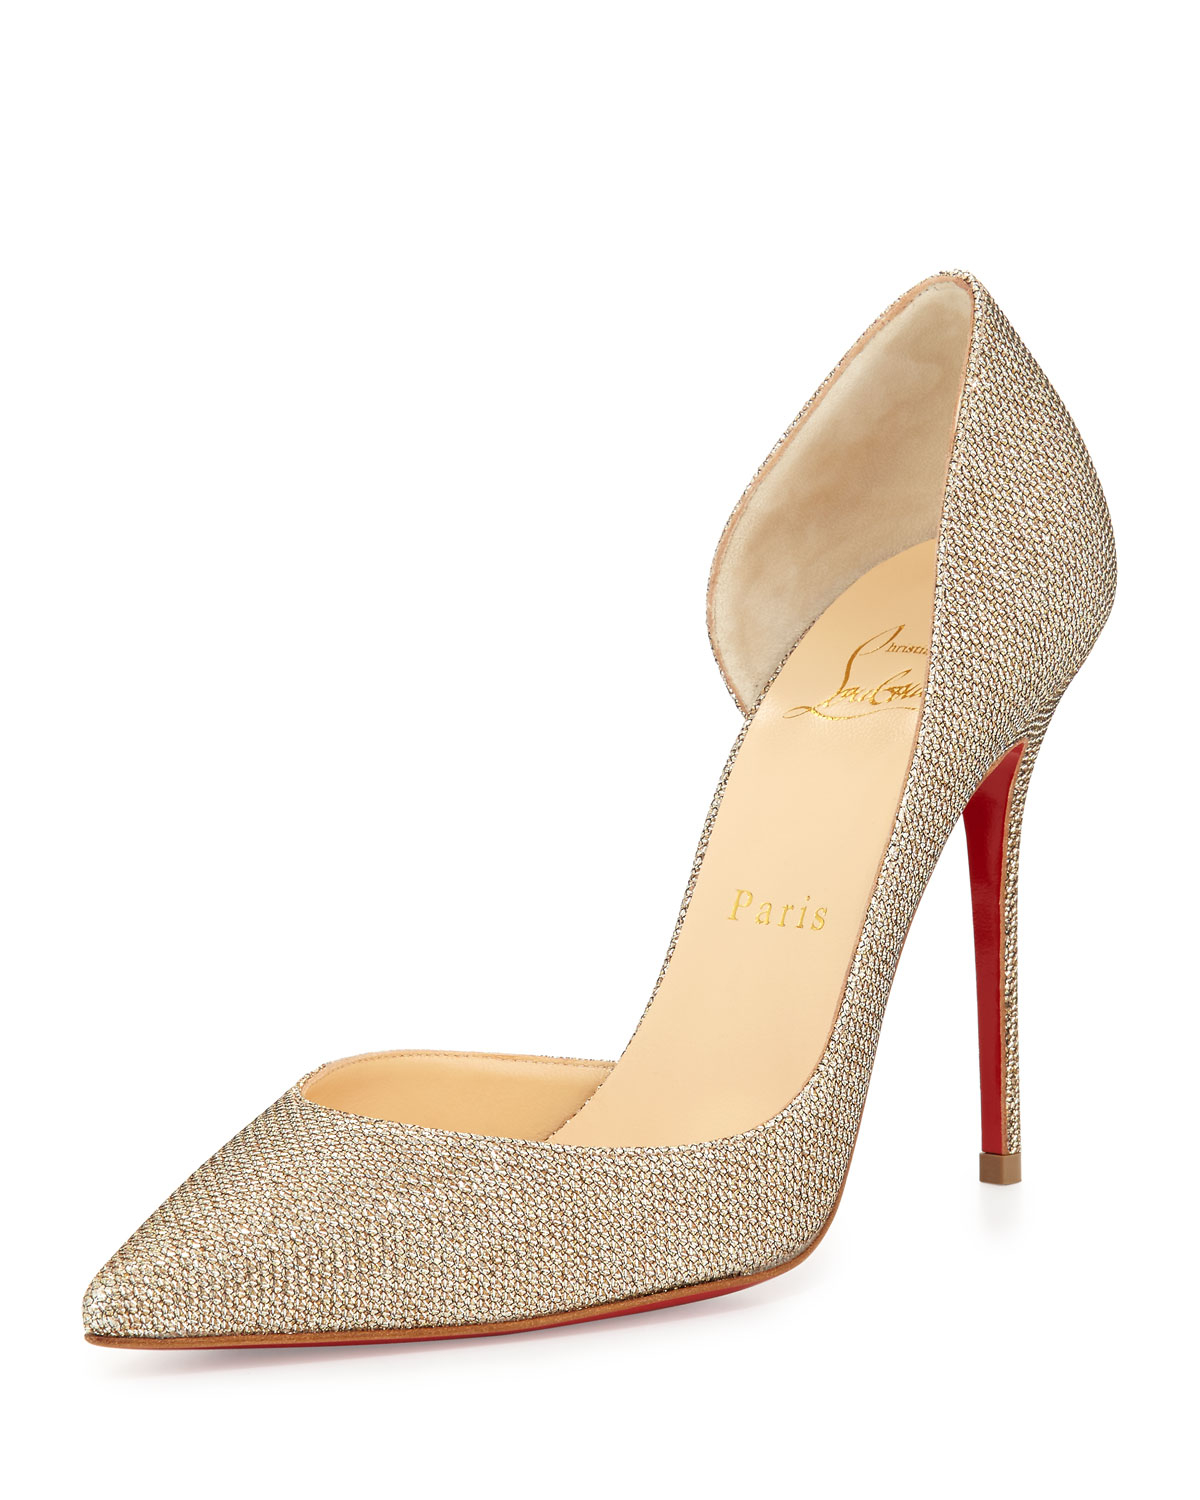 christian louboutin perforated pointed-toe pumps, replica christian ...